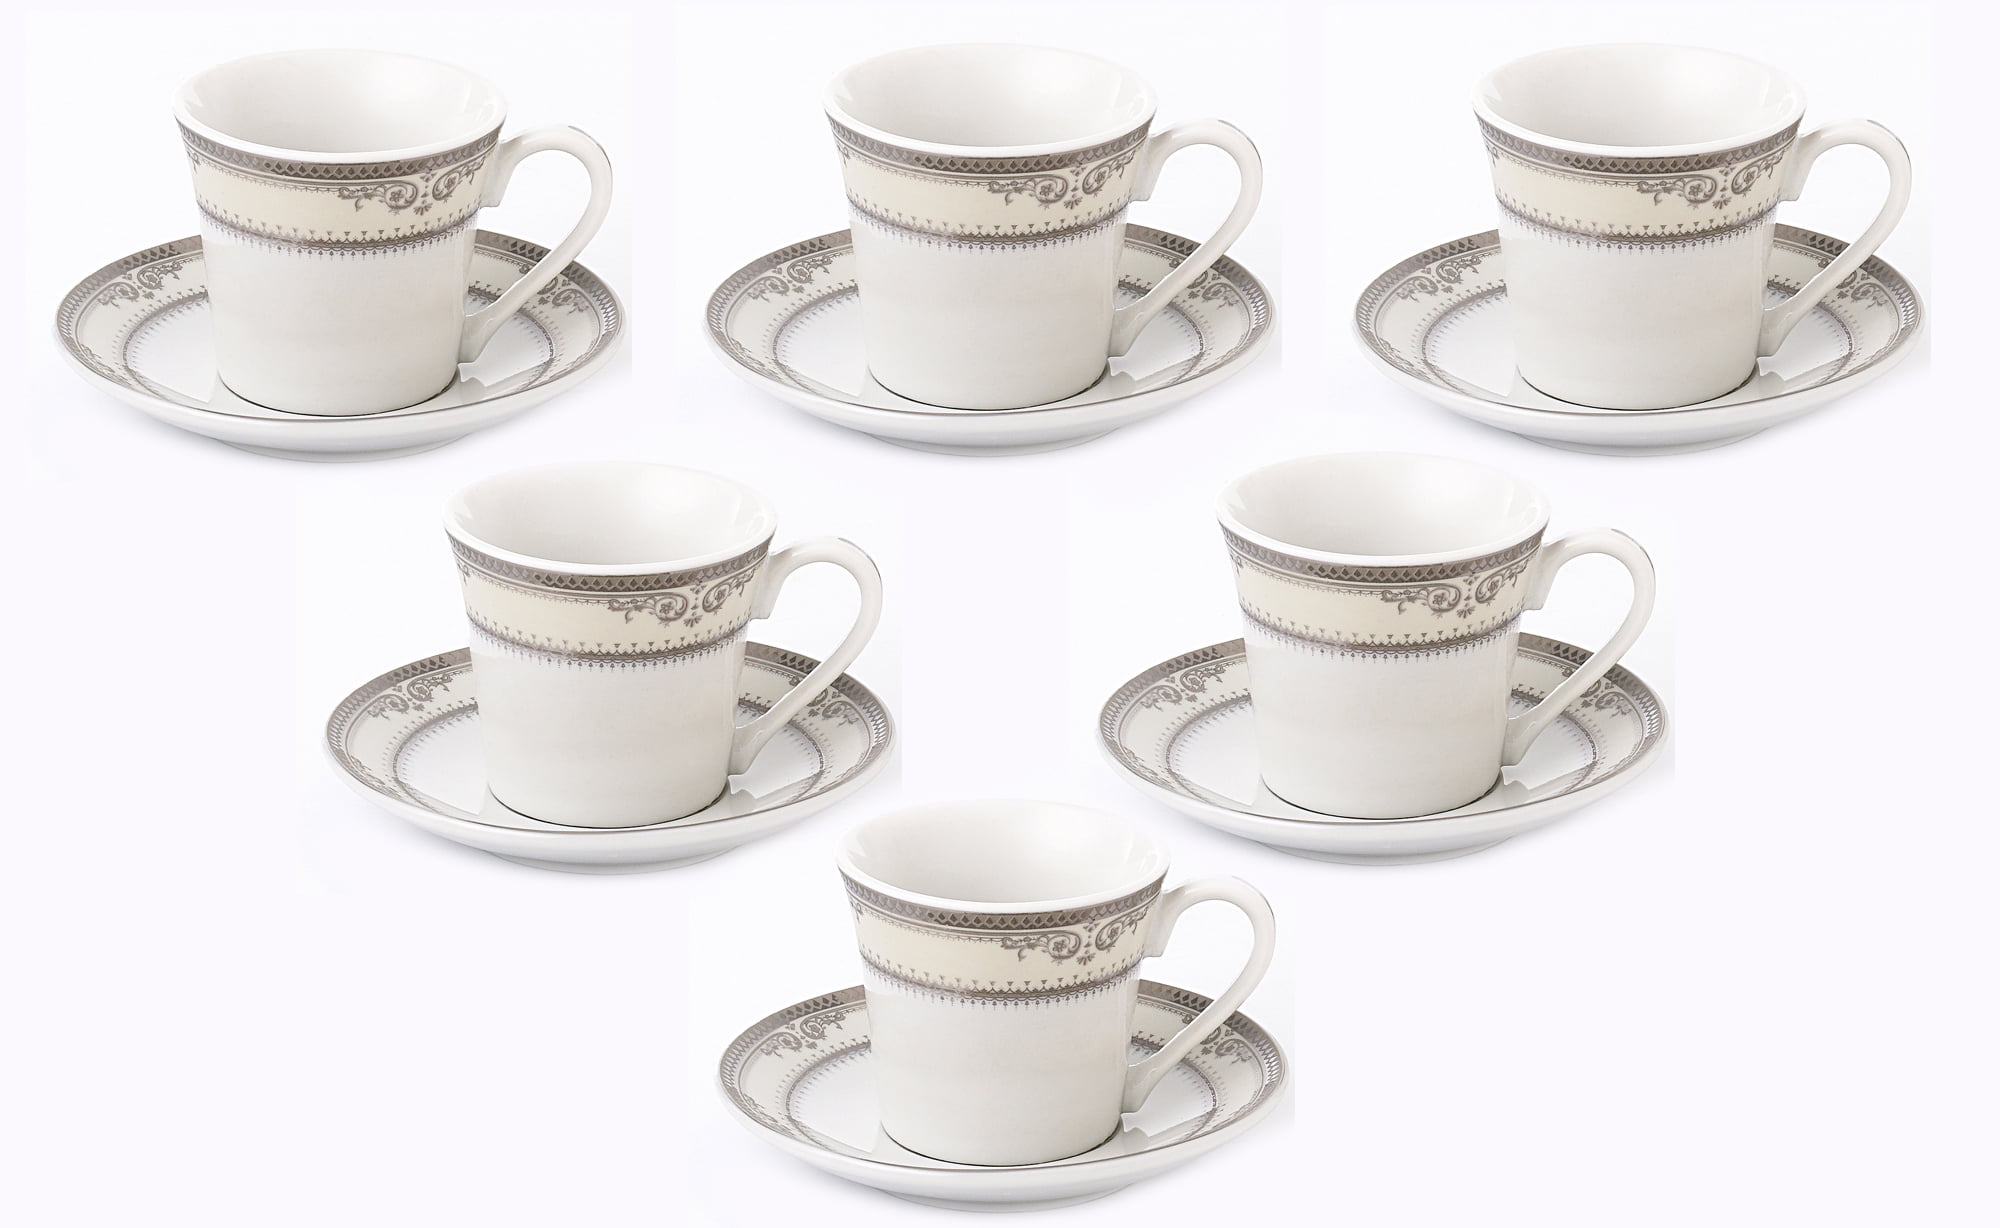 Breville Stainless Steel Espresso Cup & Saucer Set of 2